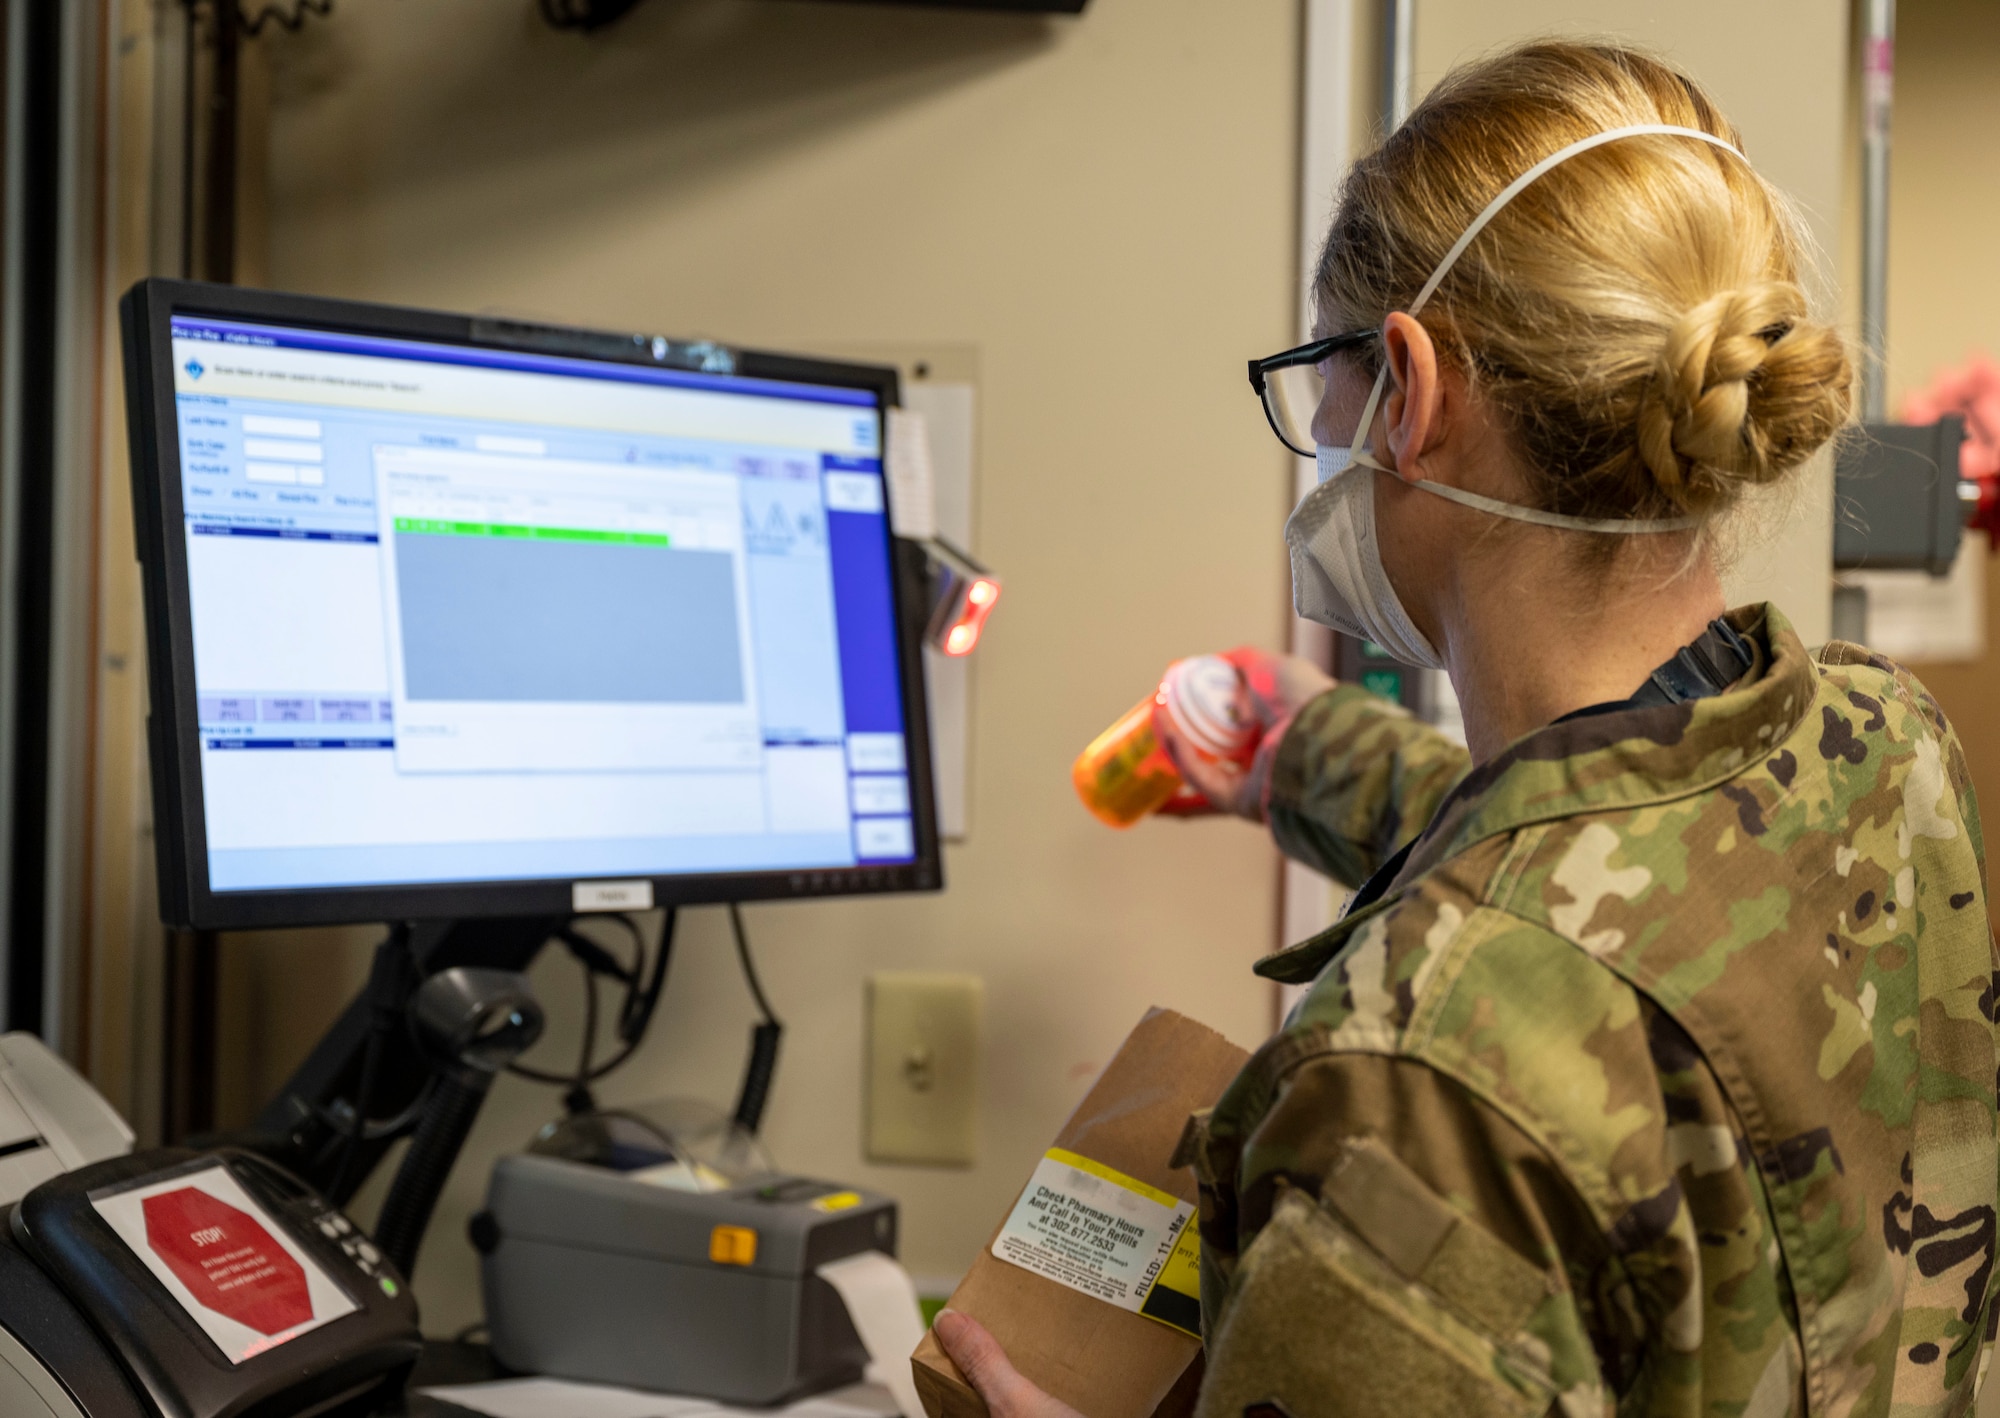 Master Sgt. Lucinda Allen, 436th Medical Support Squadron pharmacy flight chief, scans the bar code on a prescription bottle at the 436th Medical Group pharmacy on Dover Air Force Base, Delaware, March 12, 2021. Scanning the bar code of a prescription ensures the medication is delivered to the right patient, and keeps records of when a patient picked up their medication. (This photo has been digitally enhanced to protect patient information) (U.S. Air Force photo by Airman 1st Class Cydney Lee)